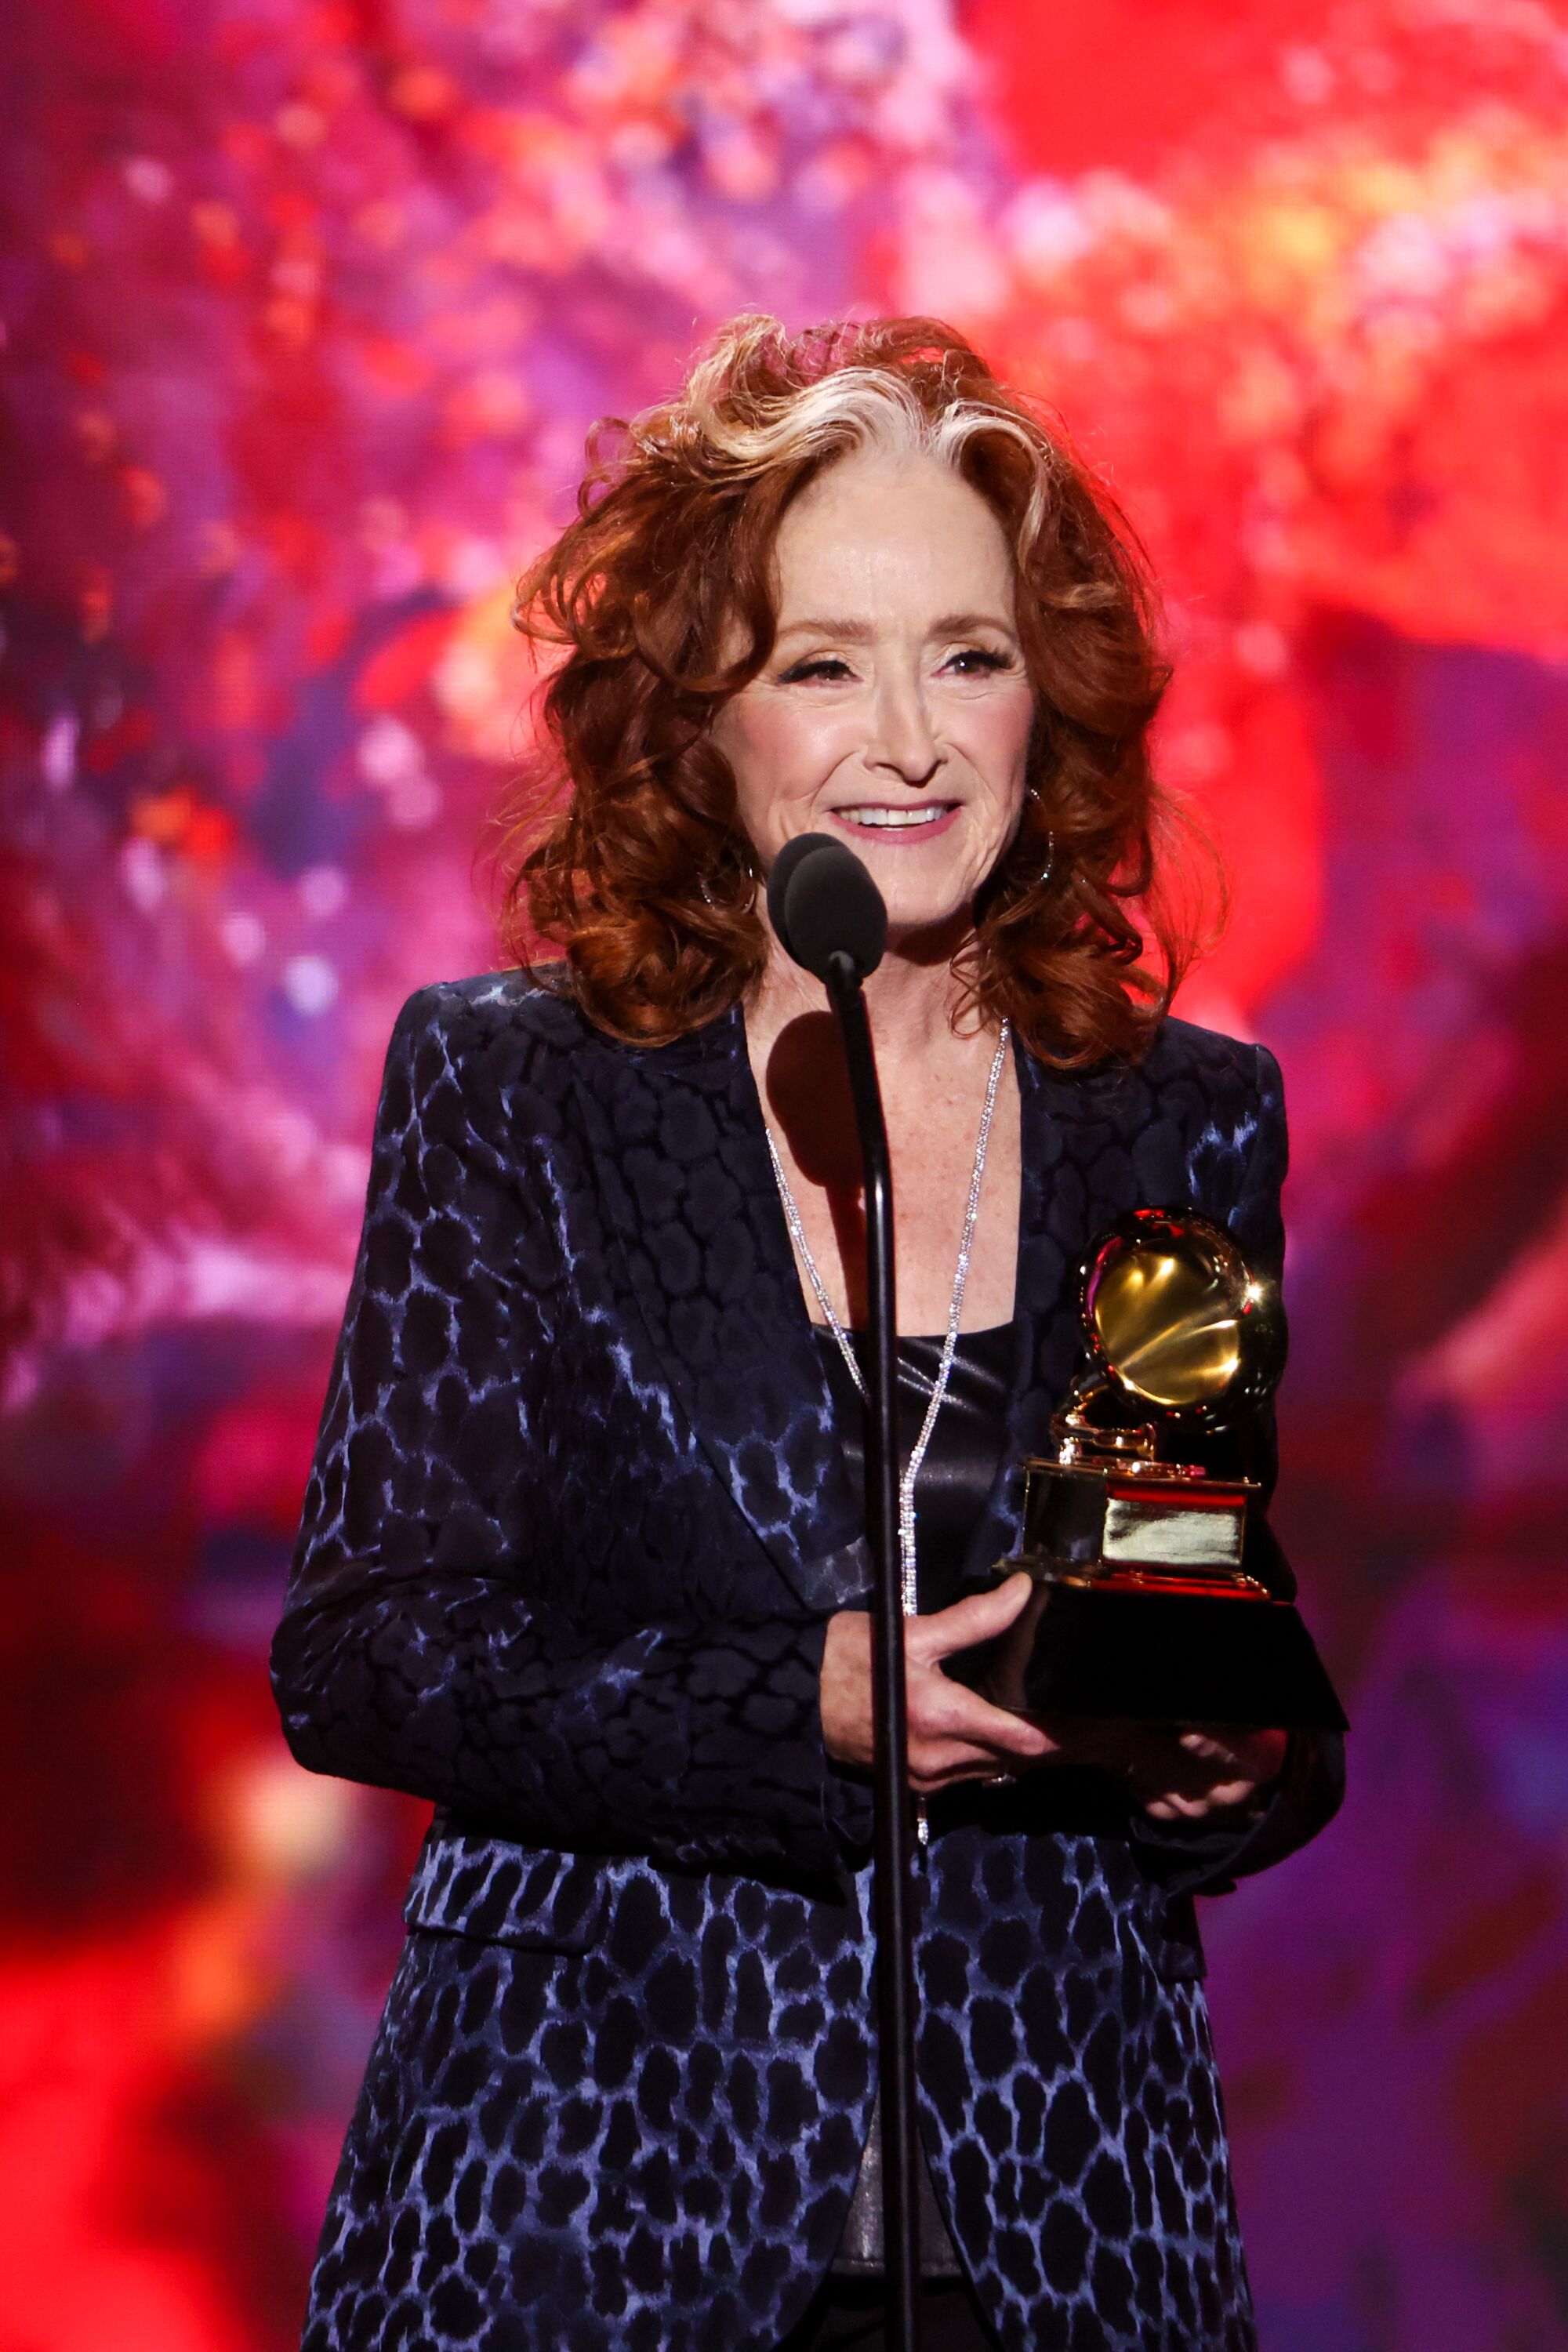 Bonnie Raitt accepts the Song of the Year award for "Just Like That" at the 65th Grammy Awards.